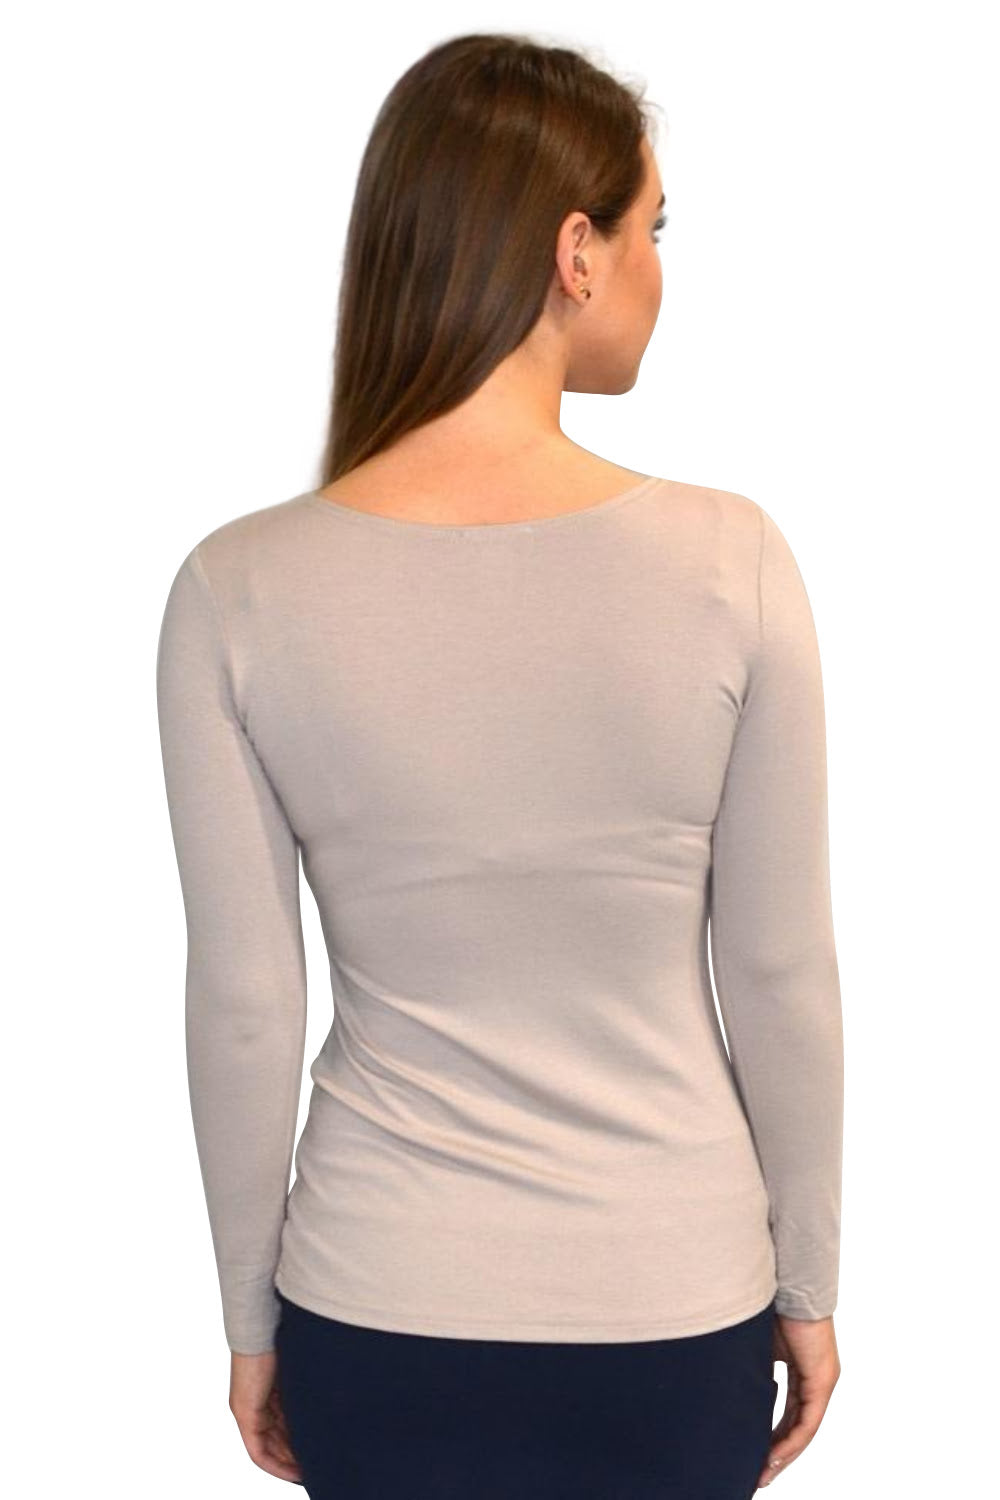 Long Sleeve Layering Tee 1223 in Taupe – Skirtz & Co